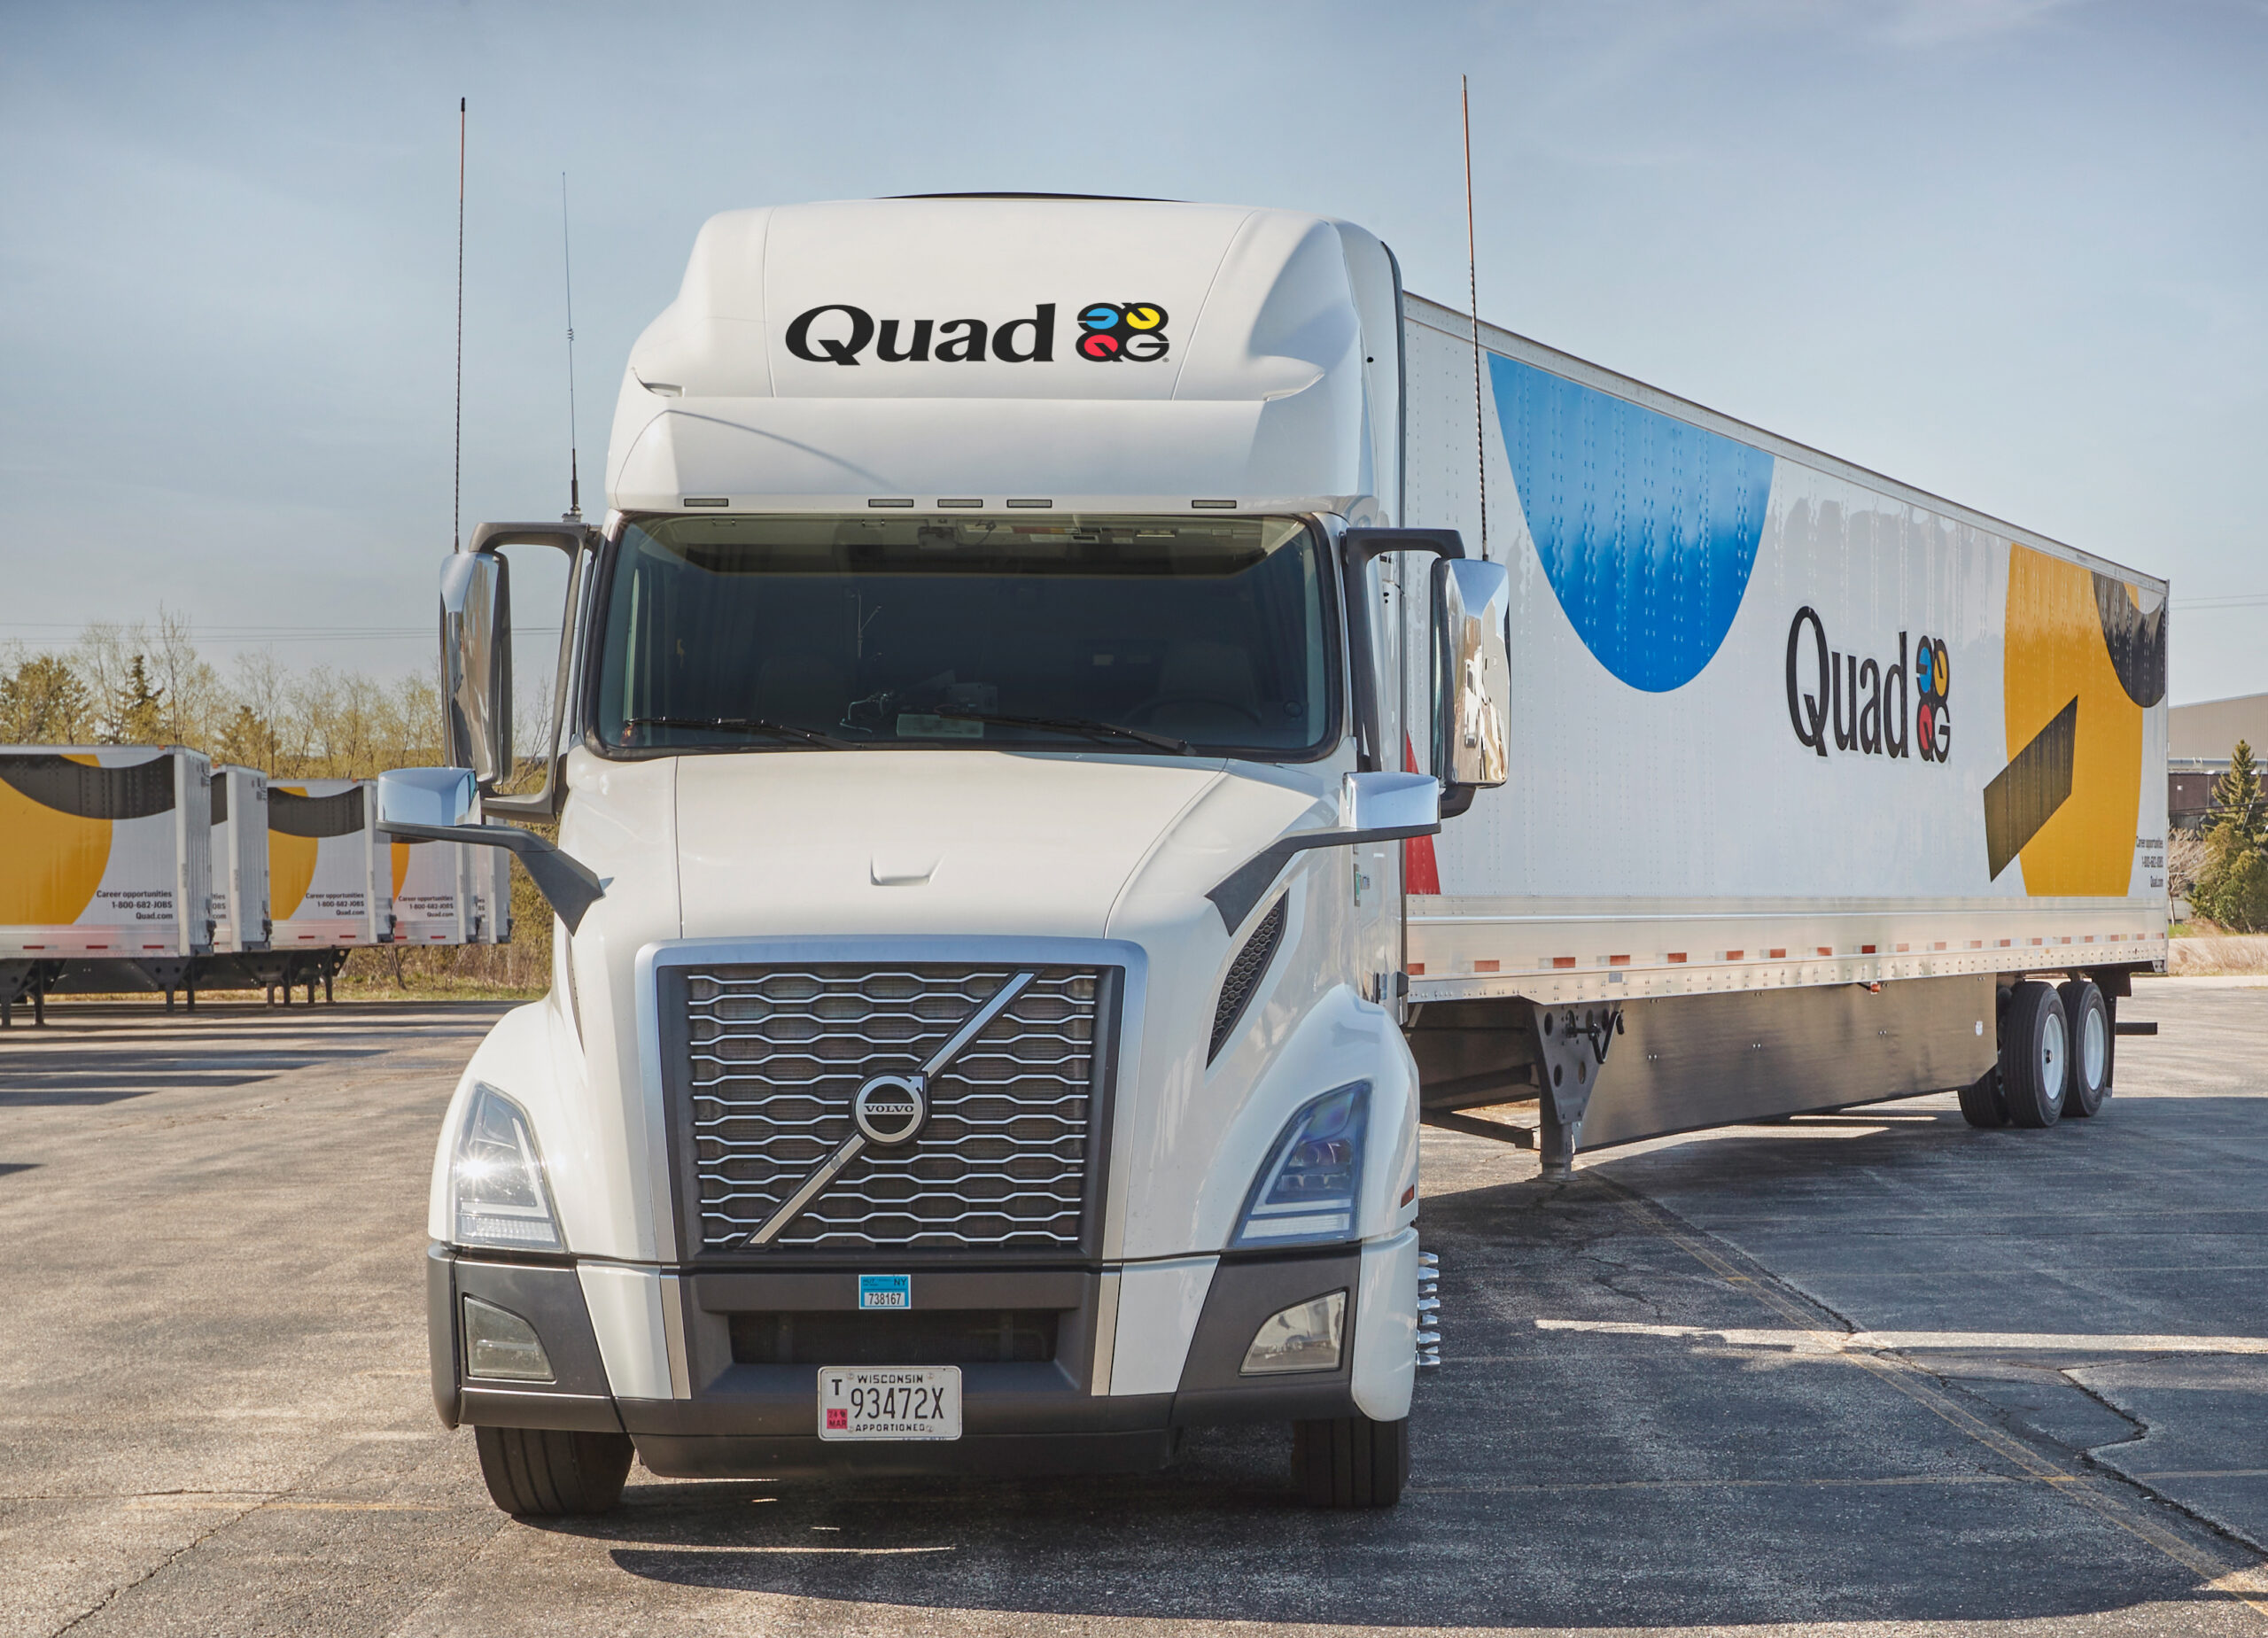 A truck using Quad’s supply chain and partnerships for streamlined logistics and budget saving